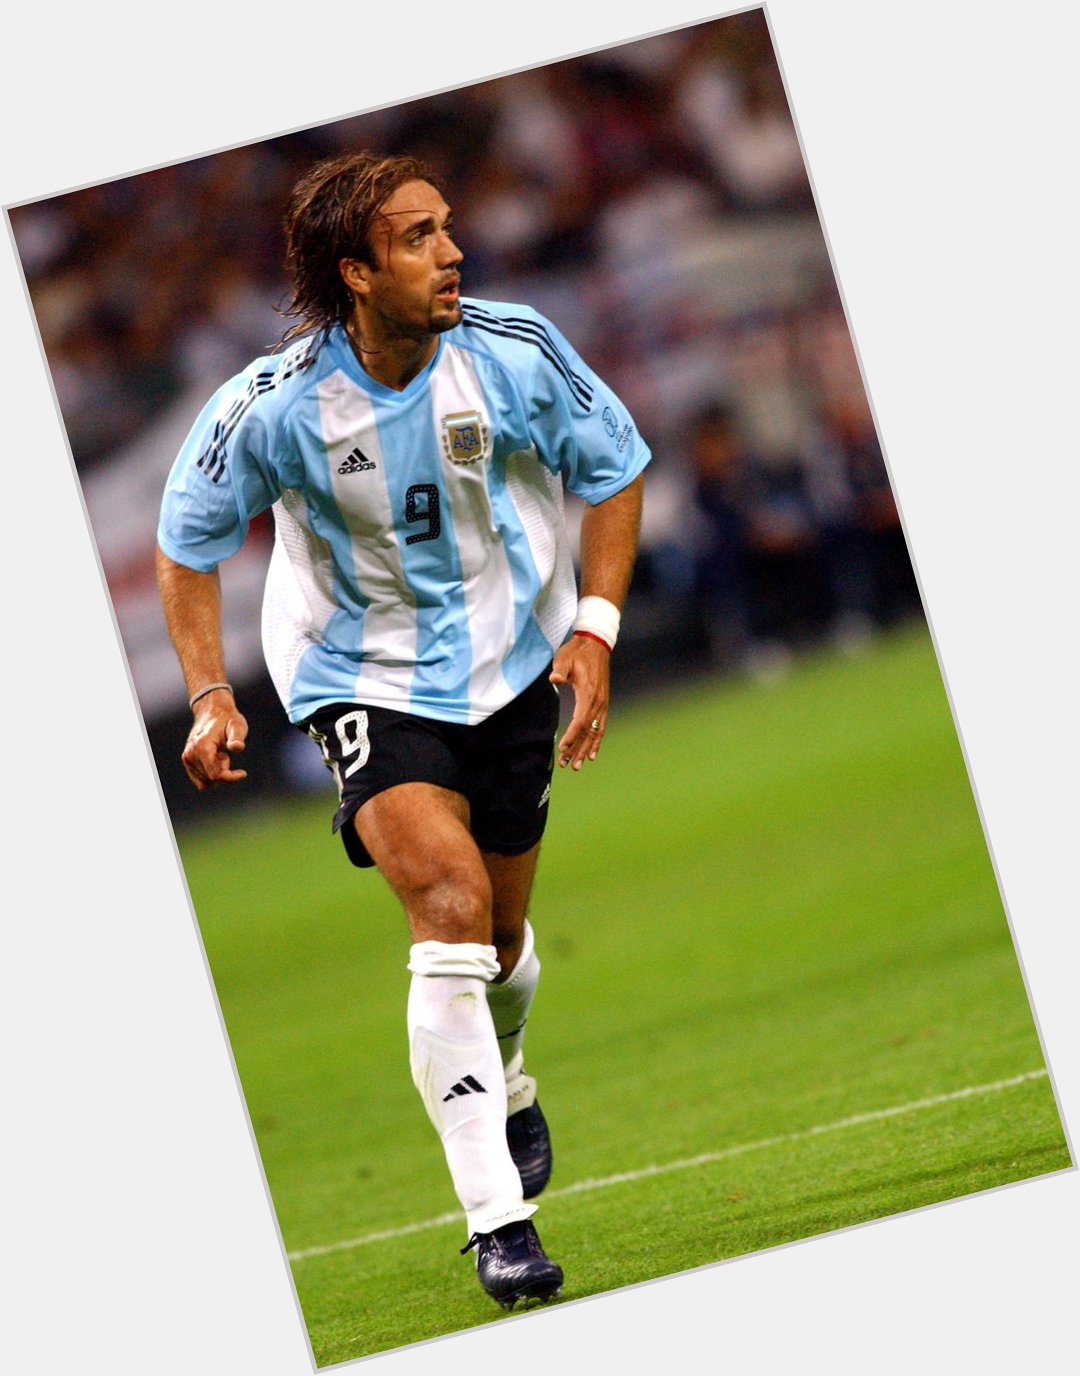 Happy birthday, Gabriel Batistuta! The only player in history to score a hat-trick at two World Cups! 